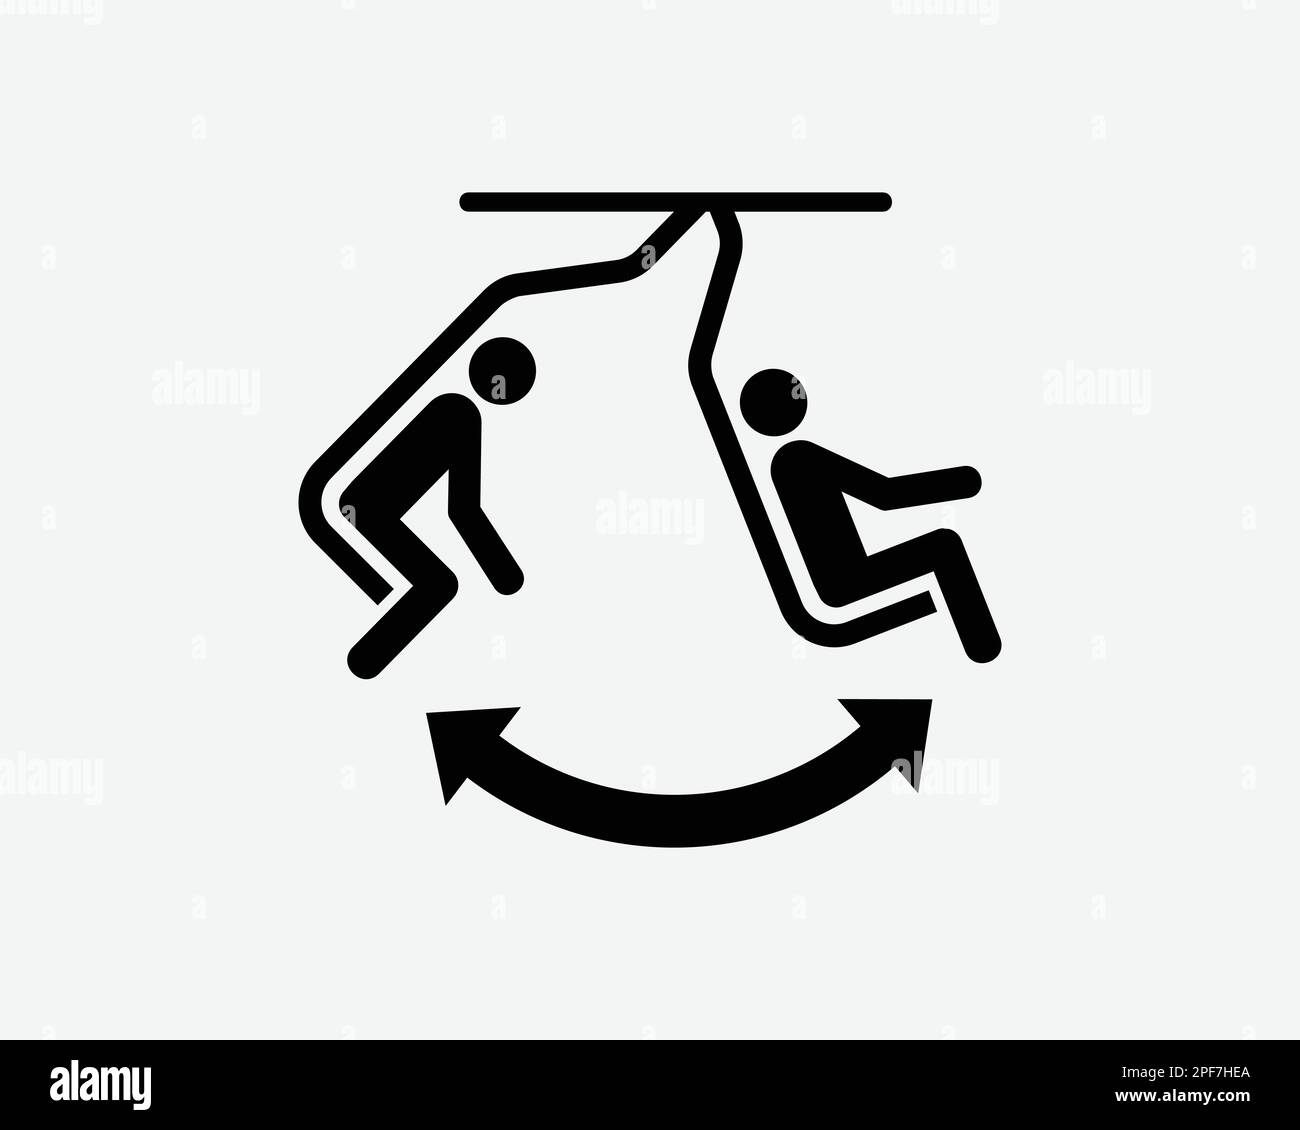 Park Swing Icon Sit Sitting Swinging Play Playground Arrow Vector Black White Silhouette Symbol Sign Graphic Clipart Artwork Illustration Pictogram Stock Vector